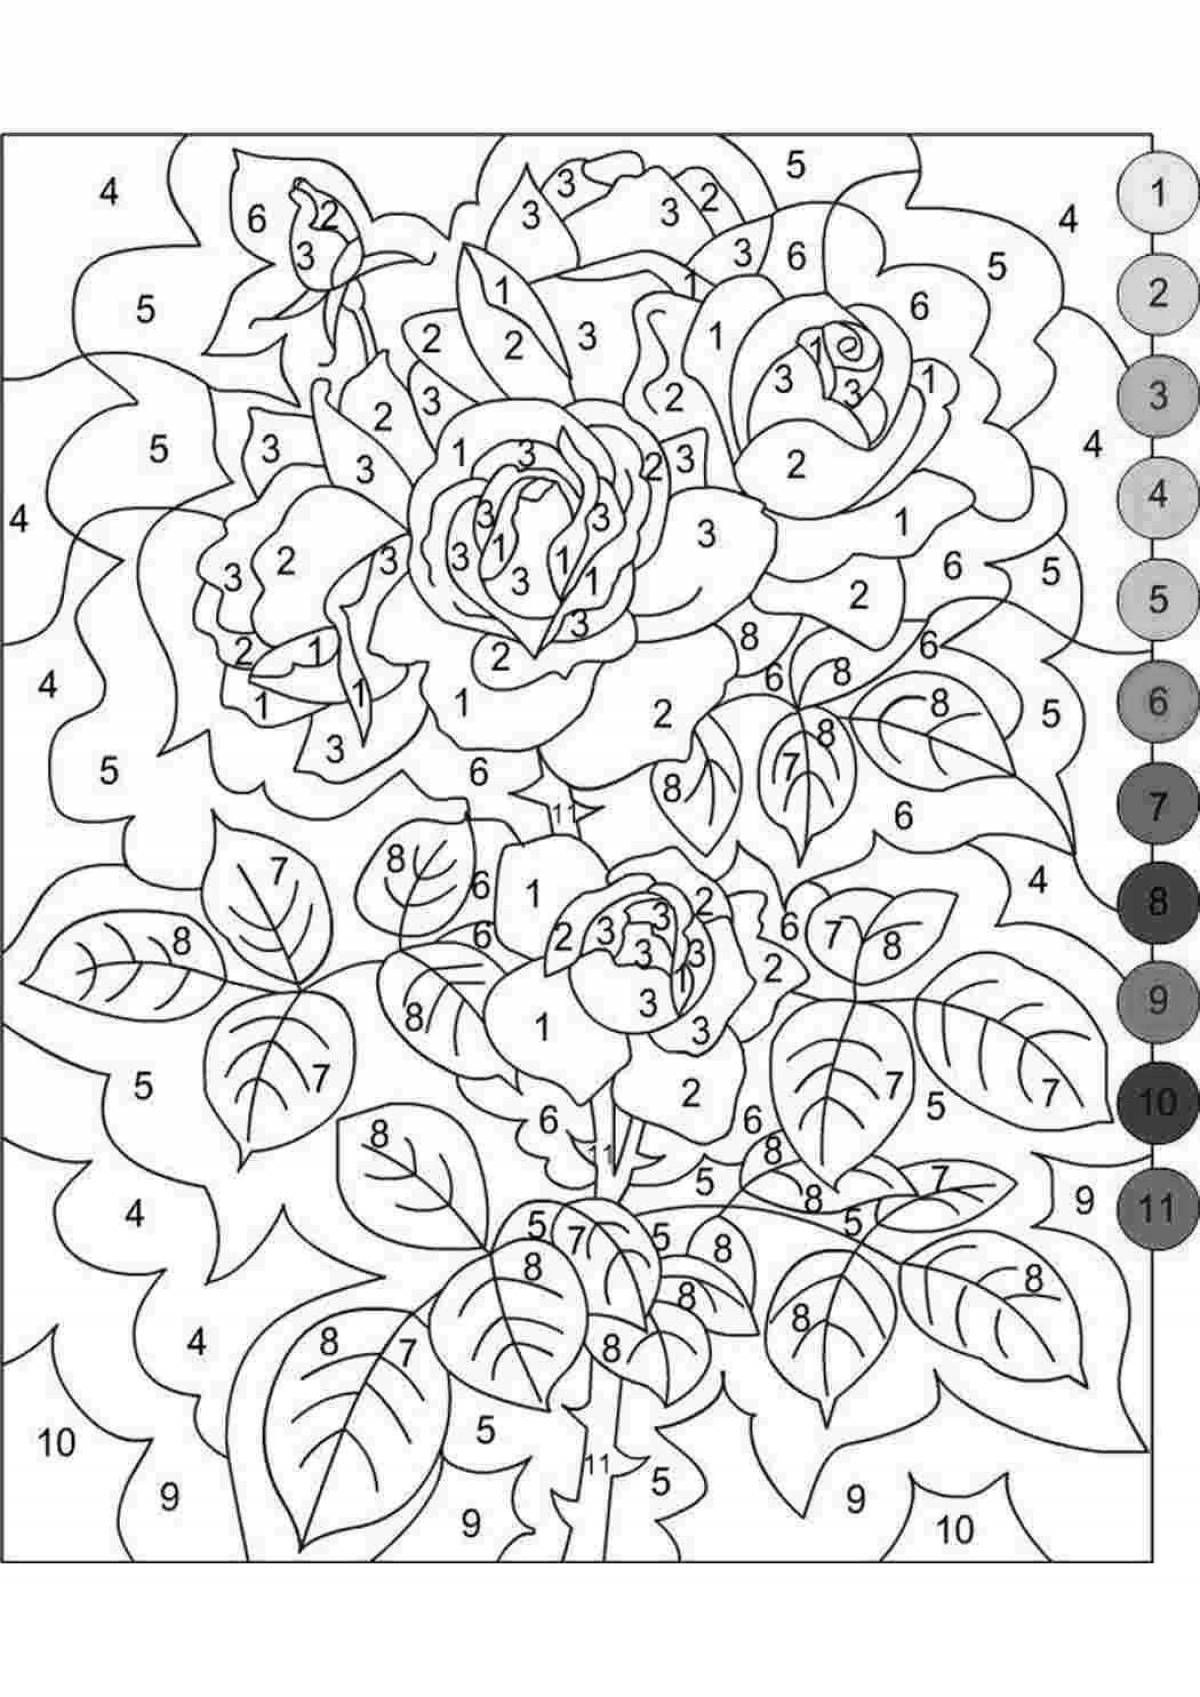 Coloring games no download by numbers